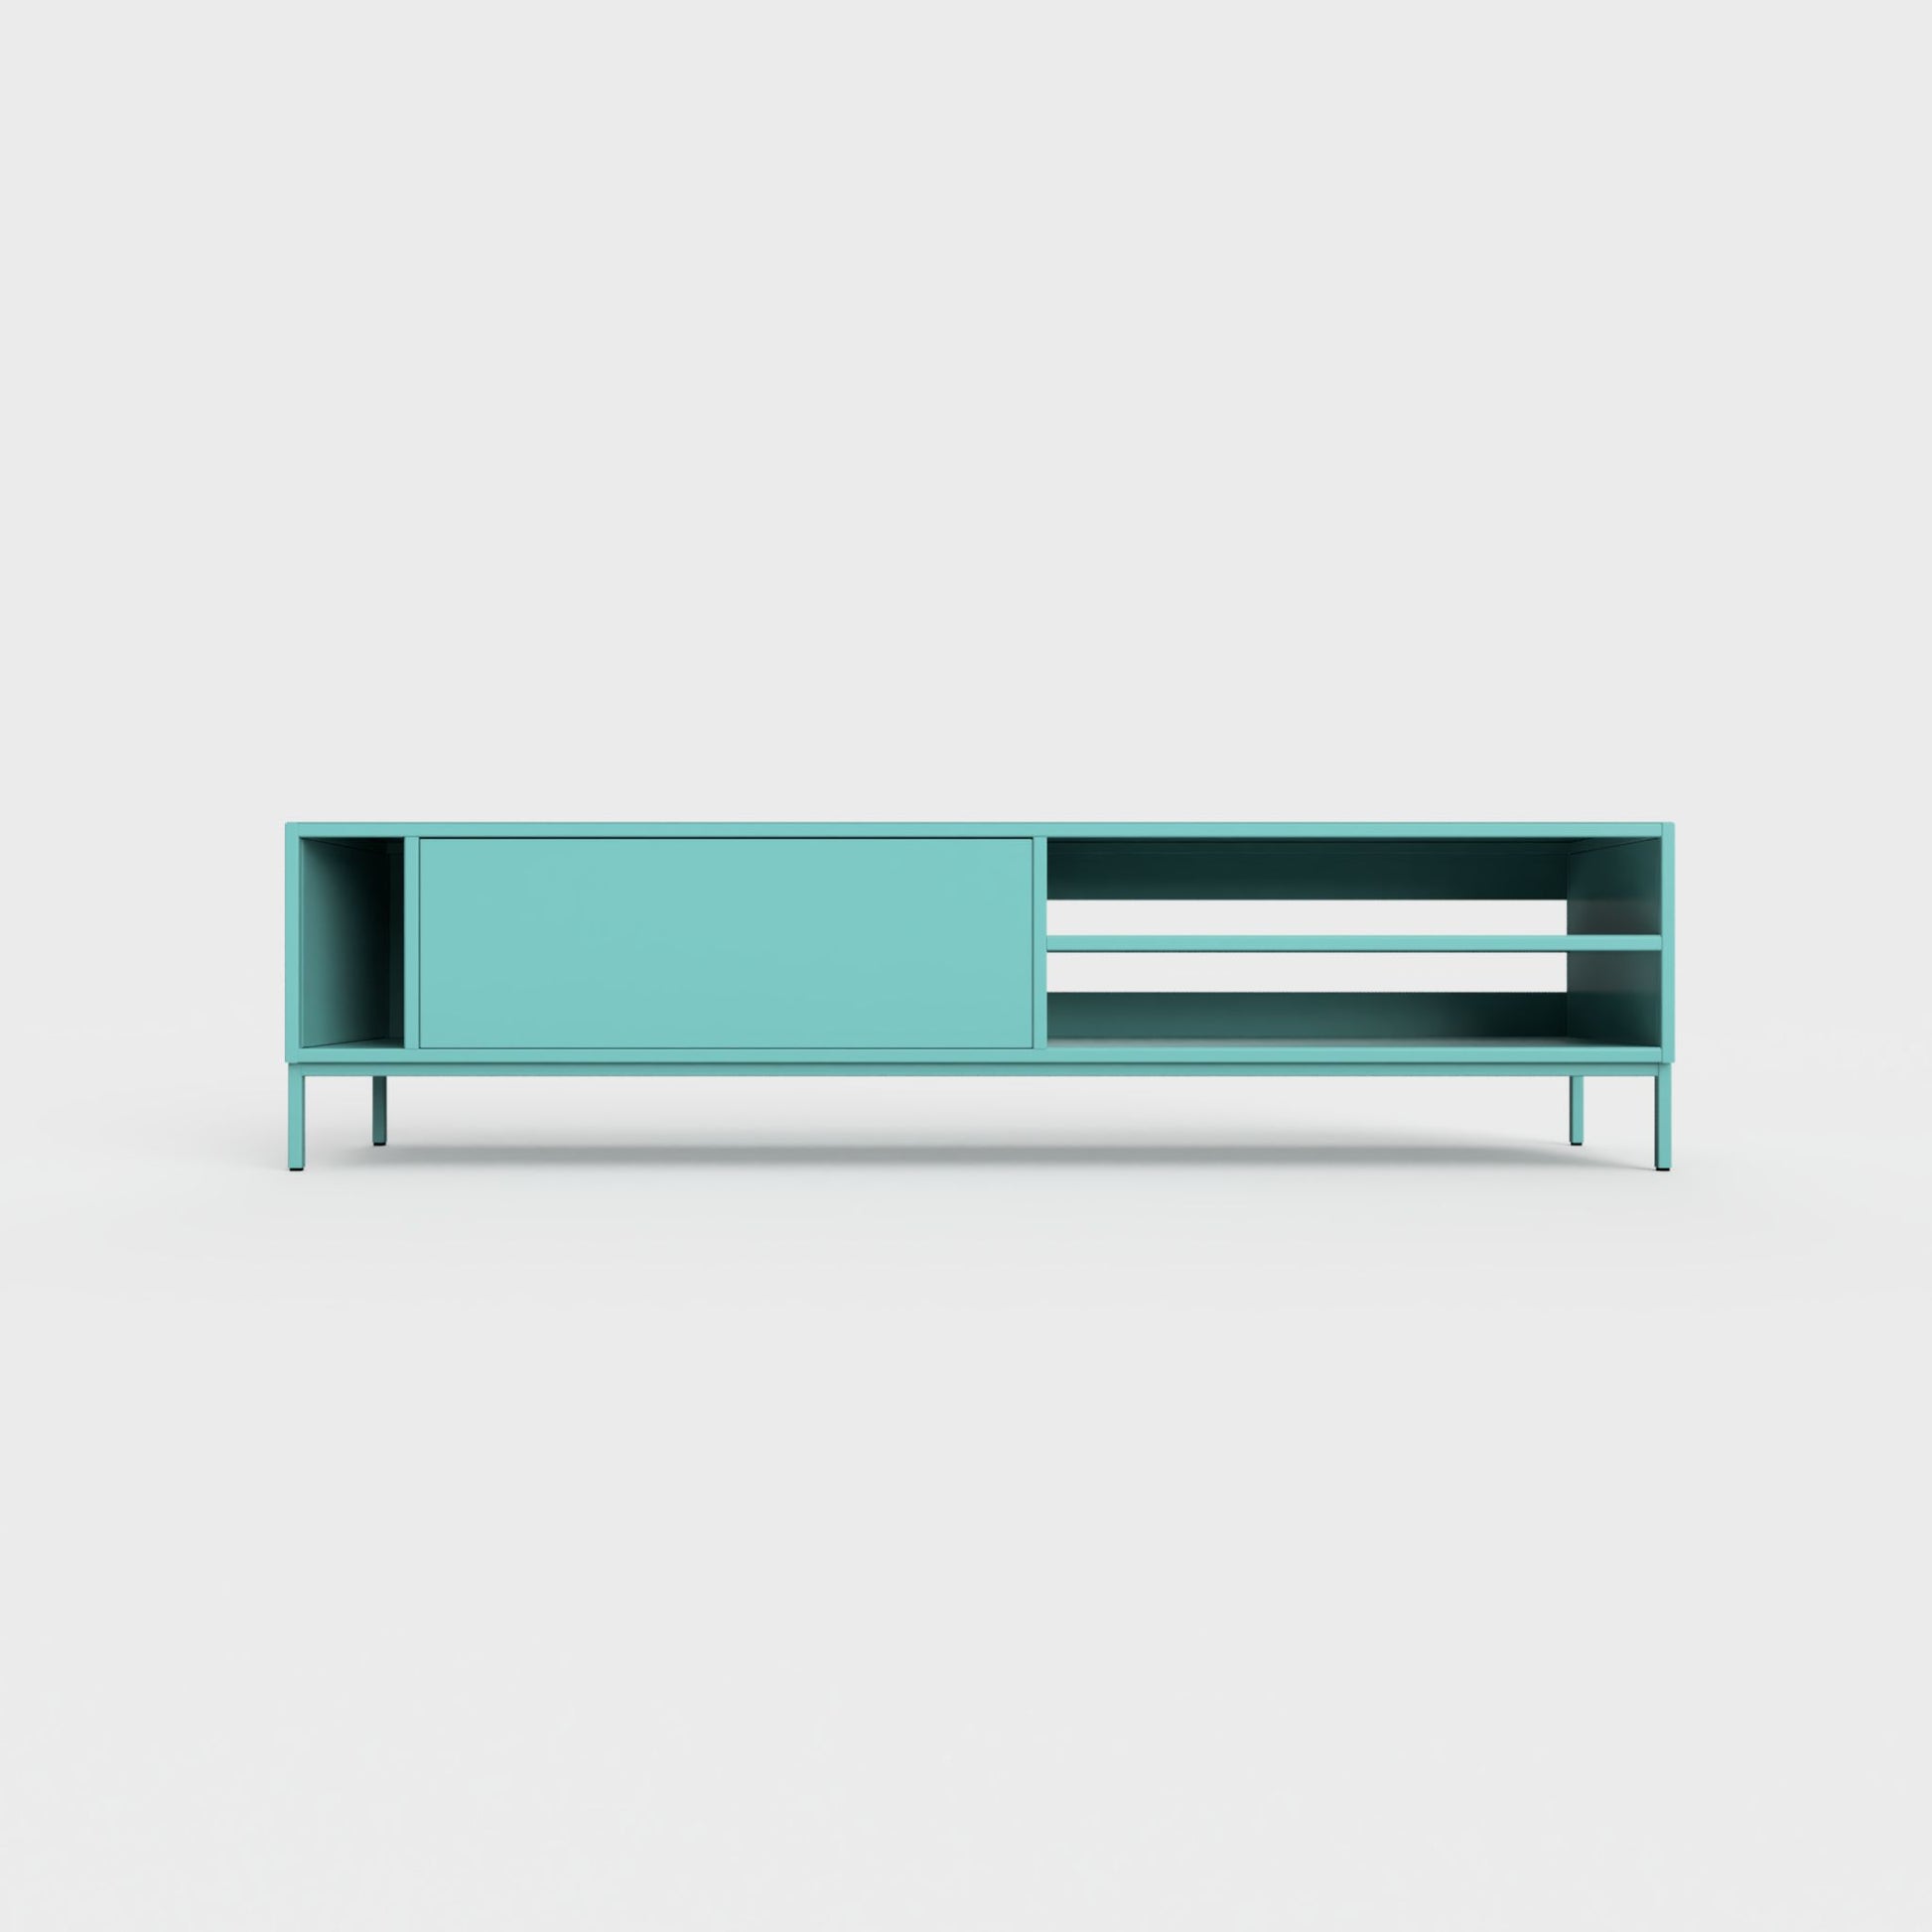 Prunus 03 Lowboard in forget me not blue green color, powder-coated steel, elegant and modern piece of furniture for your living room